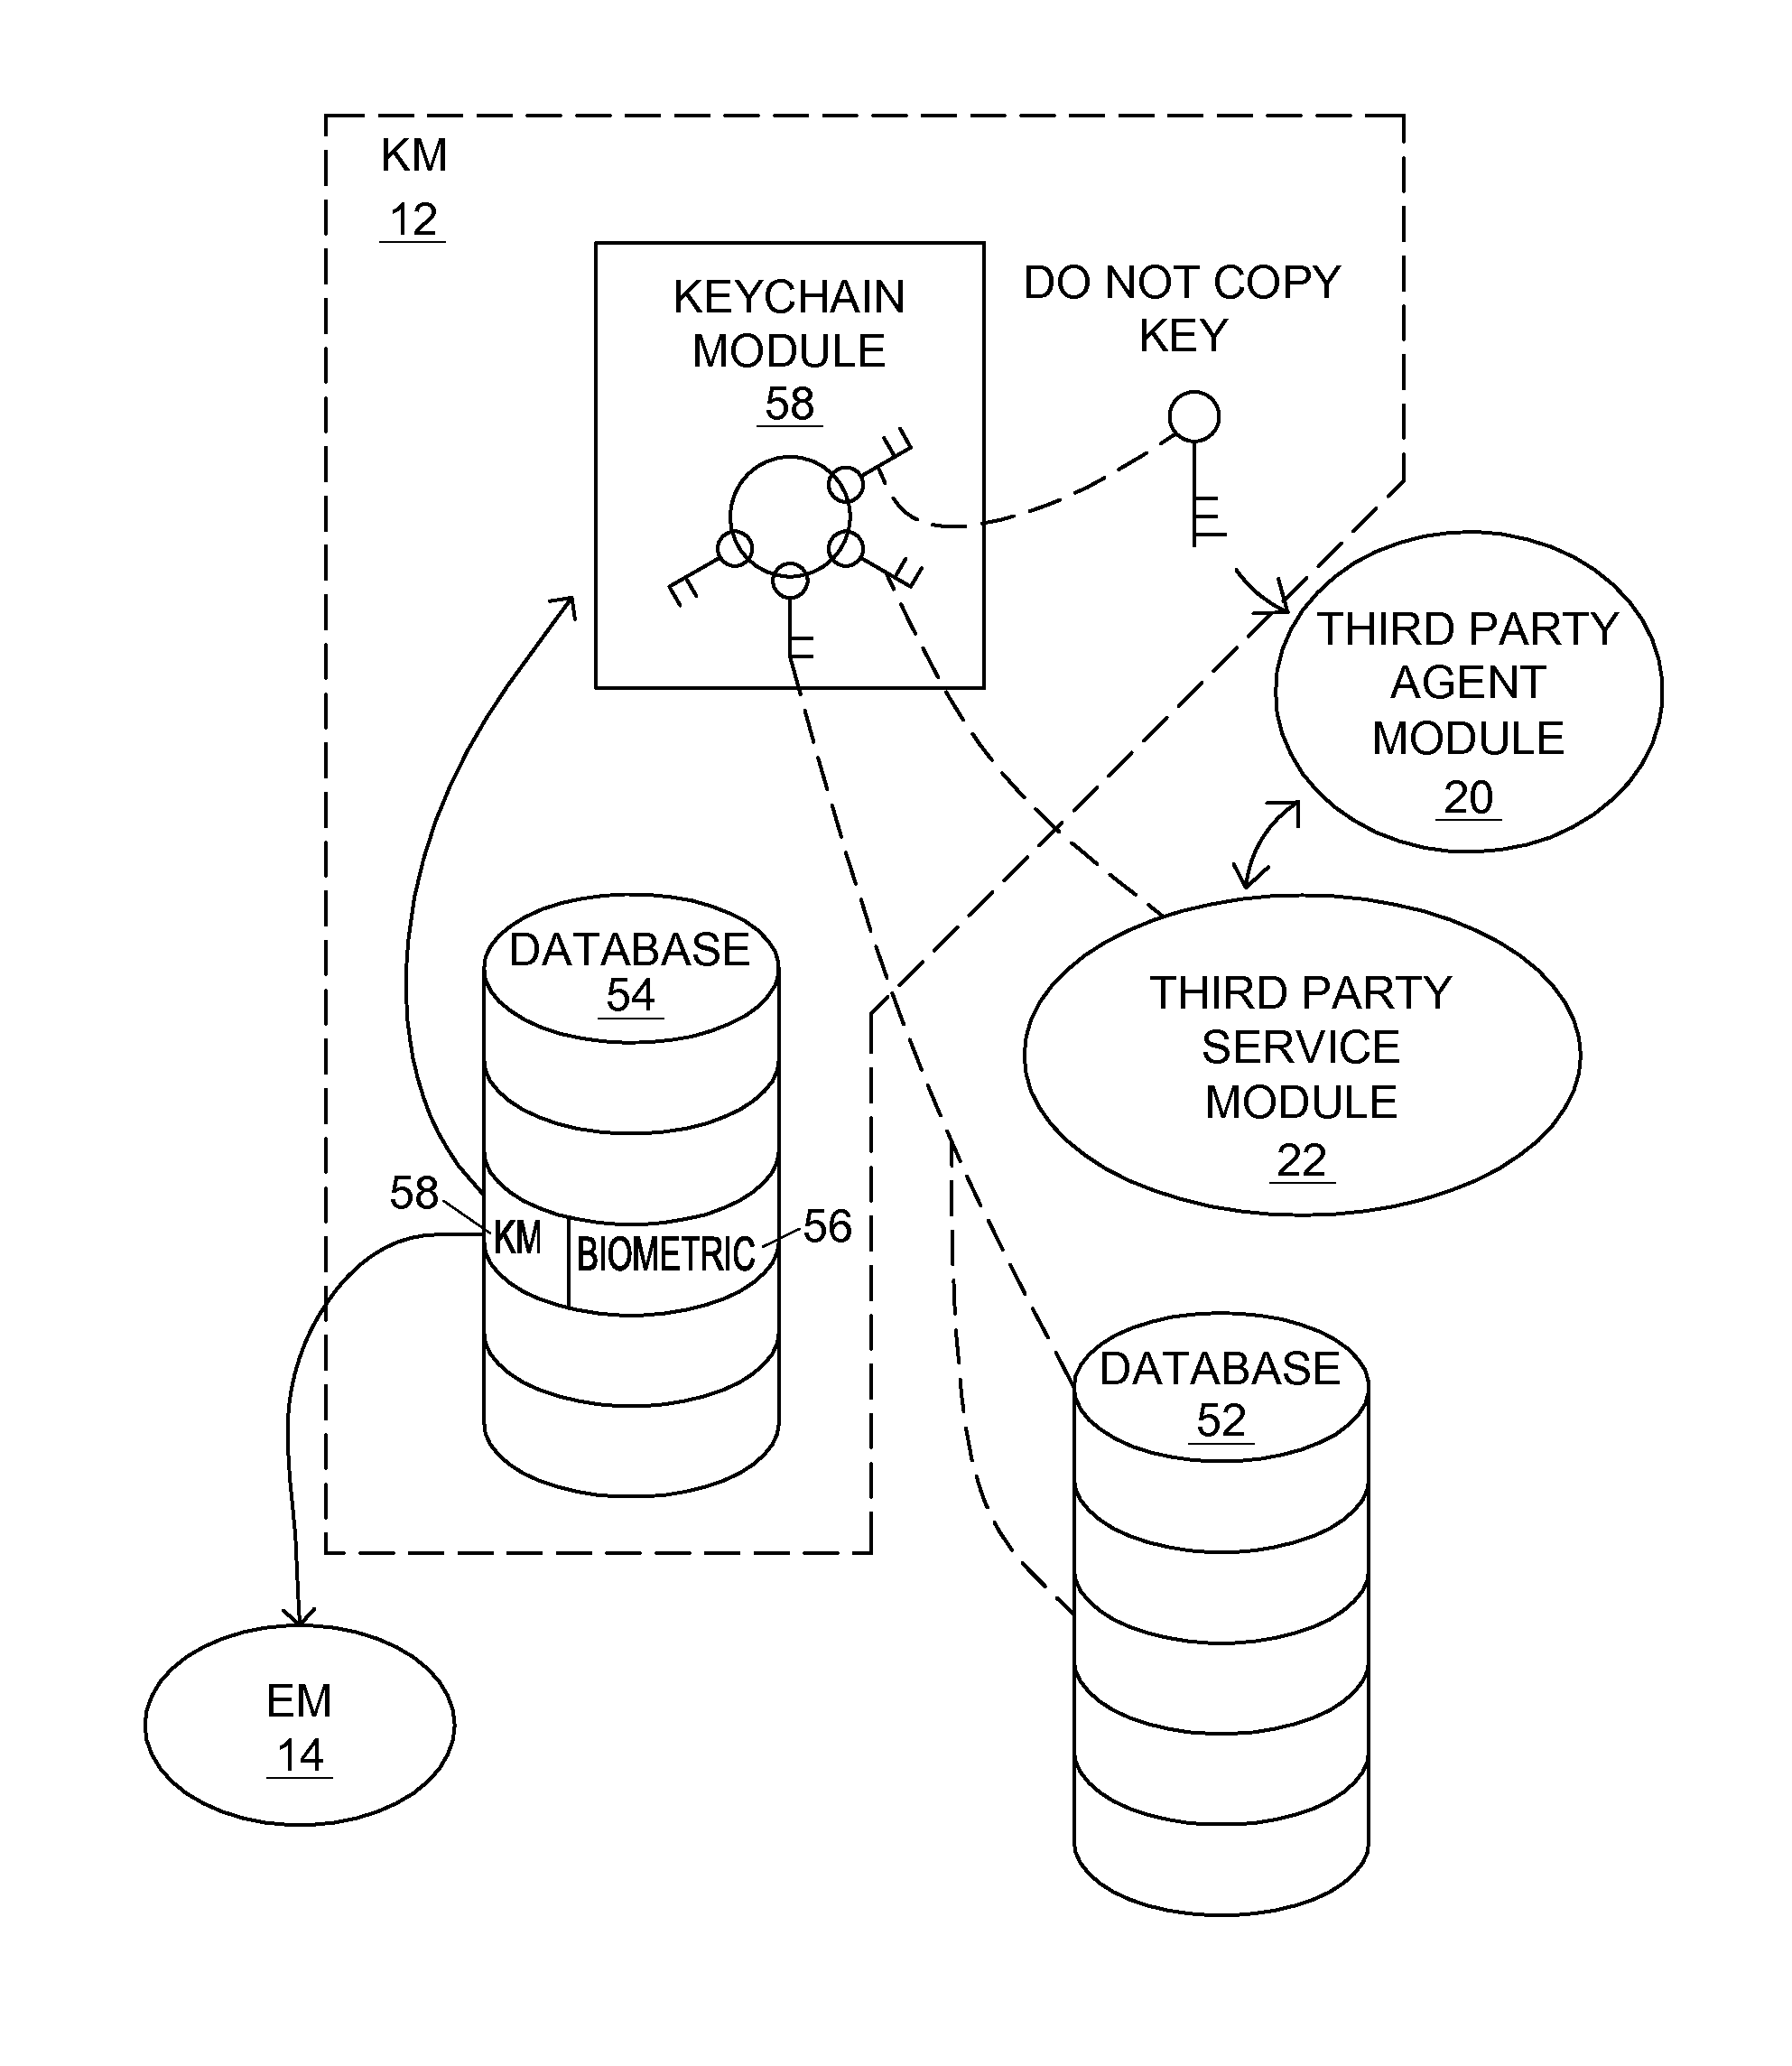 System and method of protecting, storing and decrypting keys over a computerized network